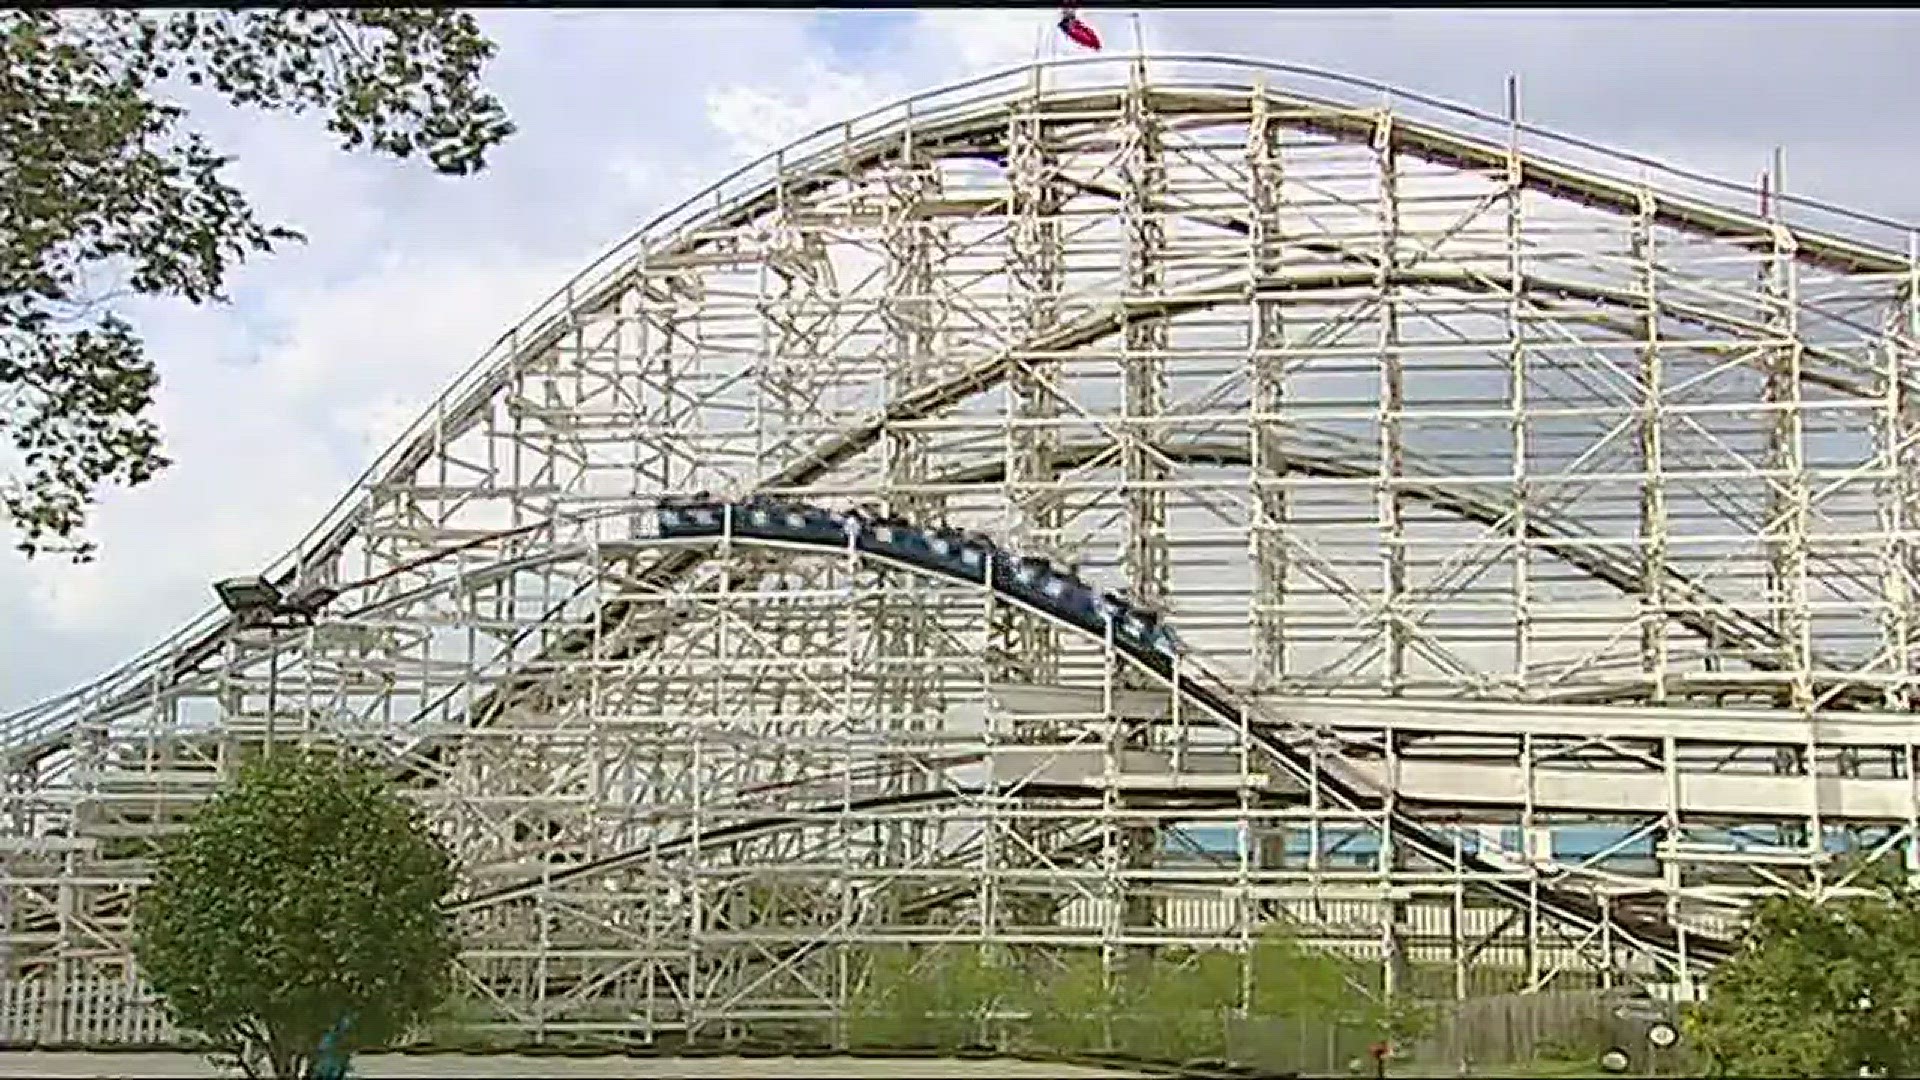 Hundreds of people are re-living the glory days on Saturday. They were meeting in west Houston to share memories from what they call the best times of their lives as employees of Astroworld!